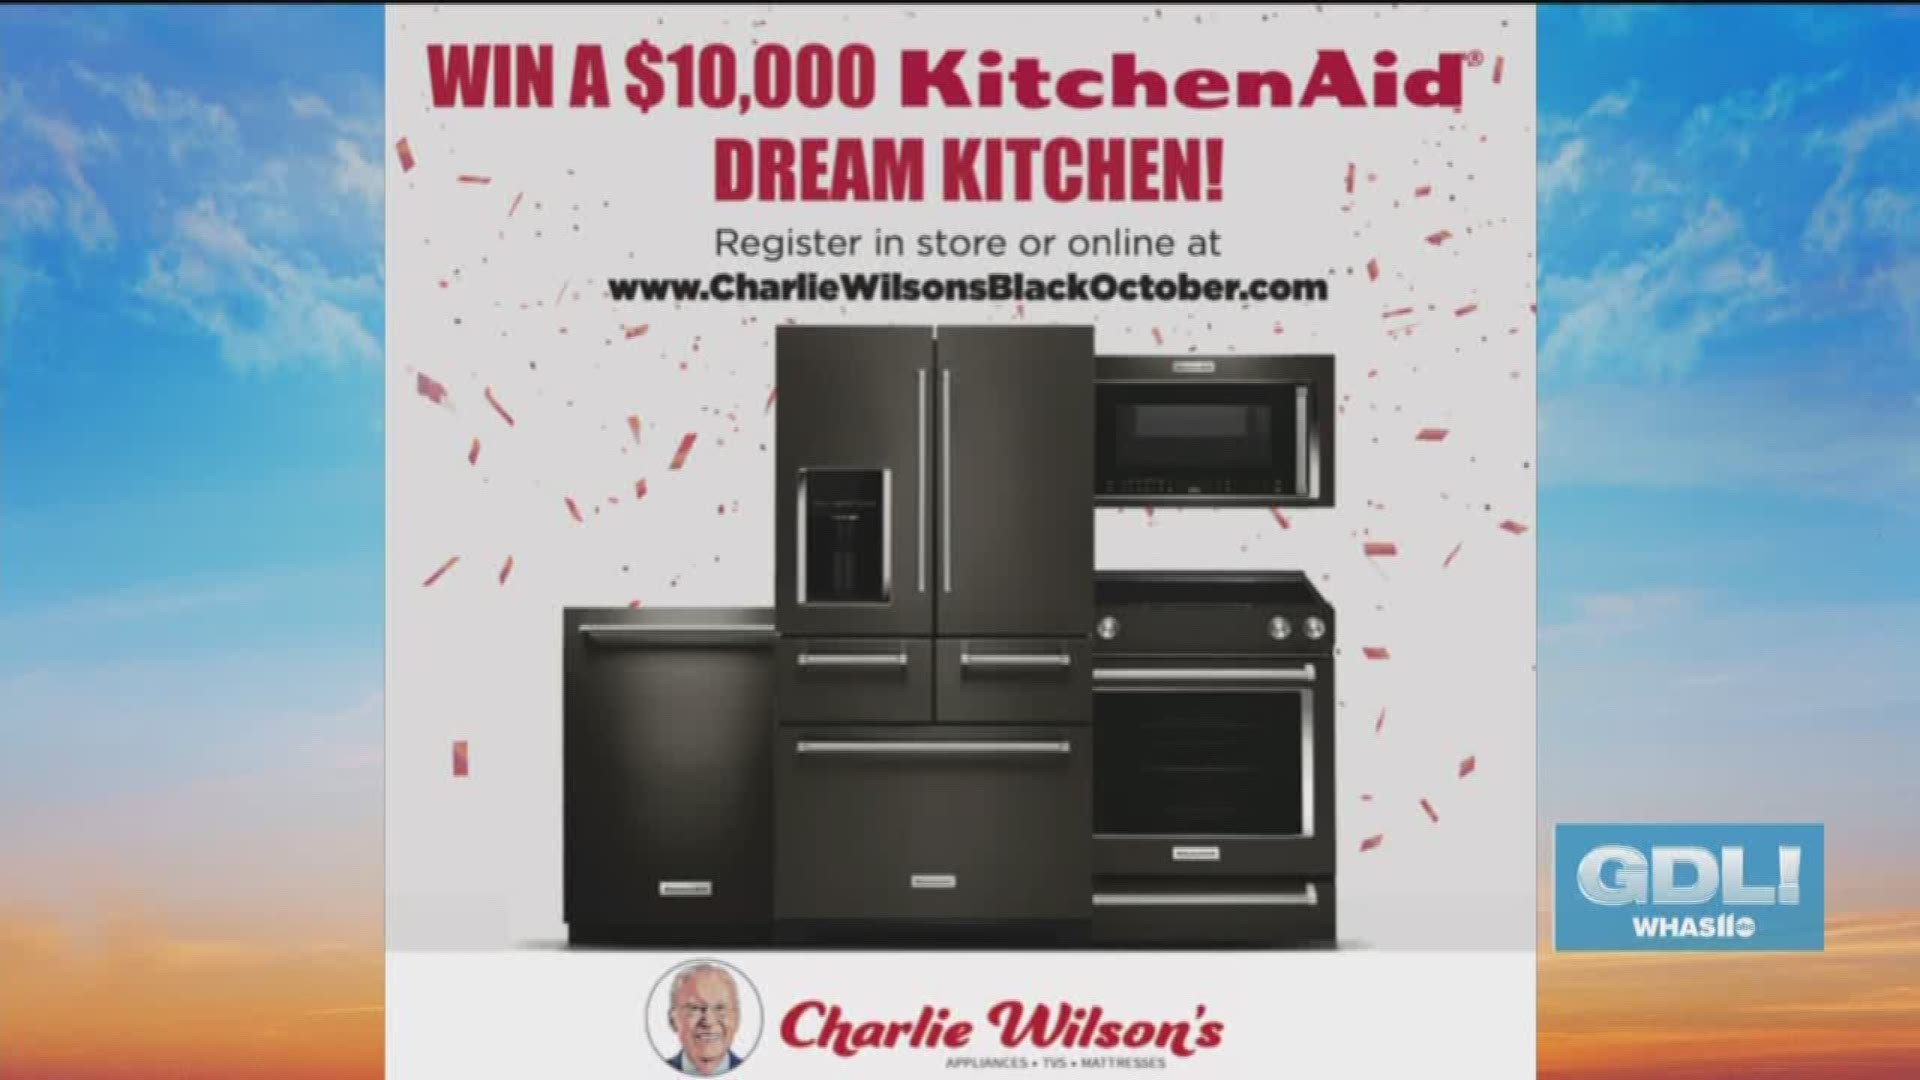 Charlie Wilson Appliance is having a Black October sale. There will be lots of mark downs and also the chance to win a $10,000 kitchen.